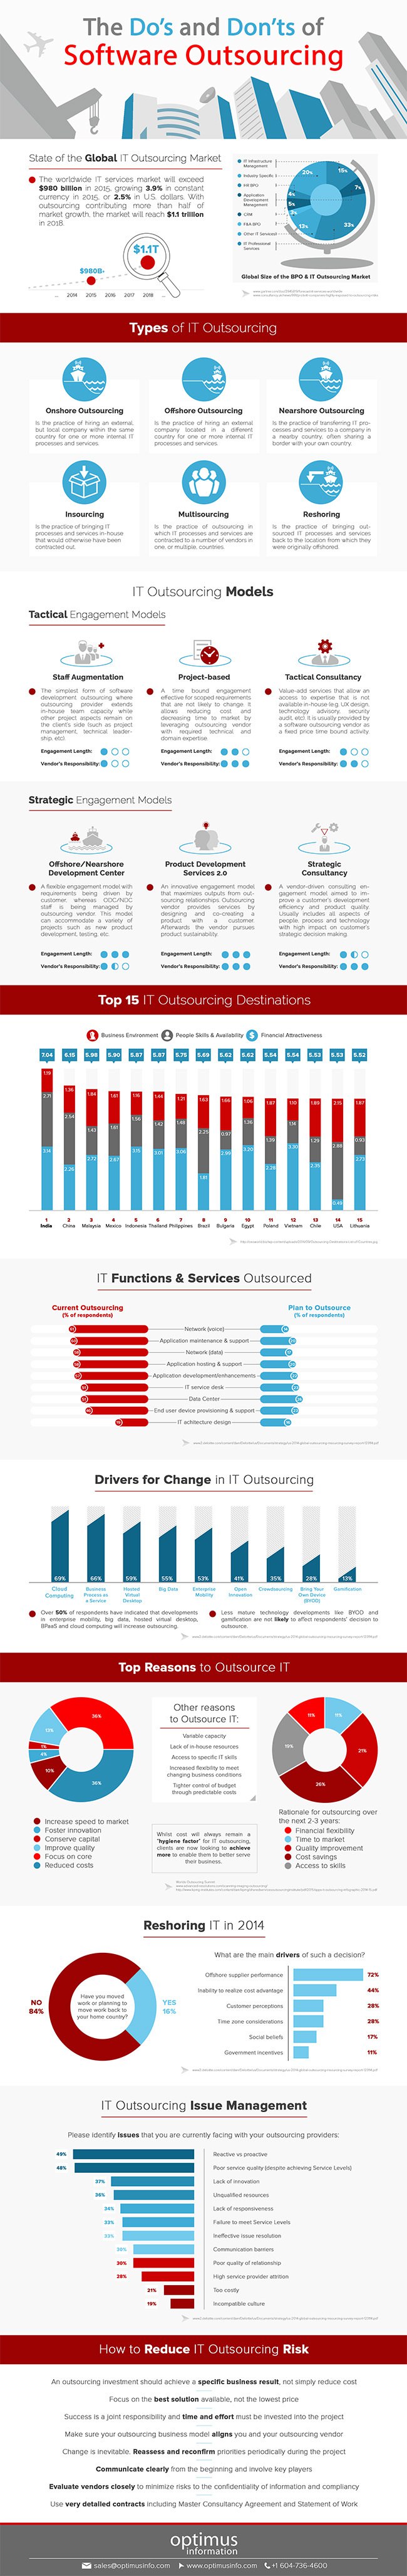 software-outsourcing-infographic Software Outsourcing: The Do's and Don'ts